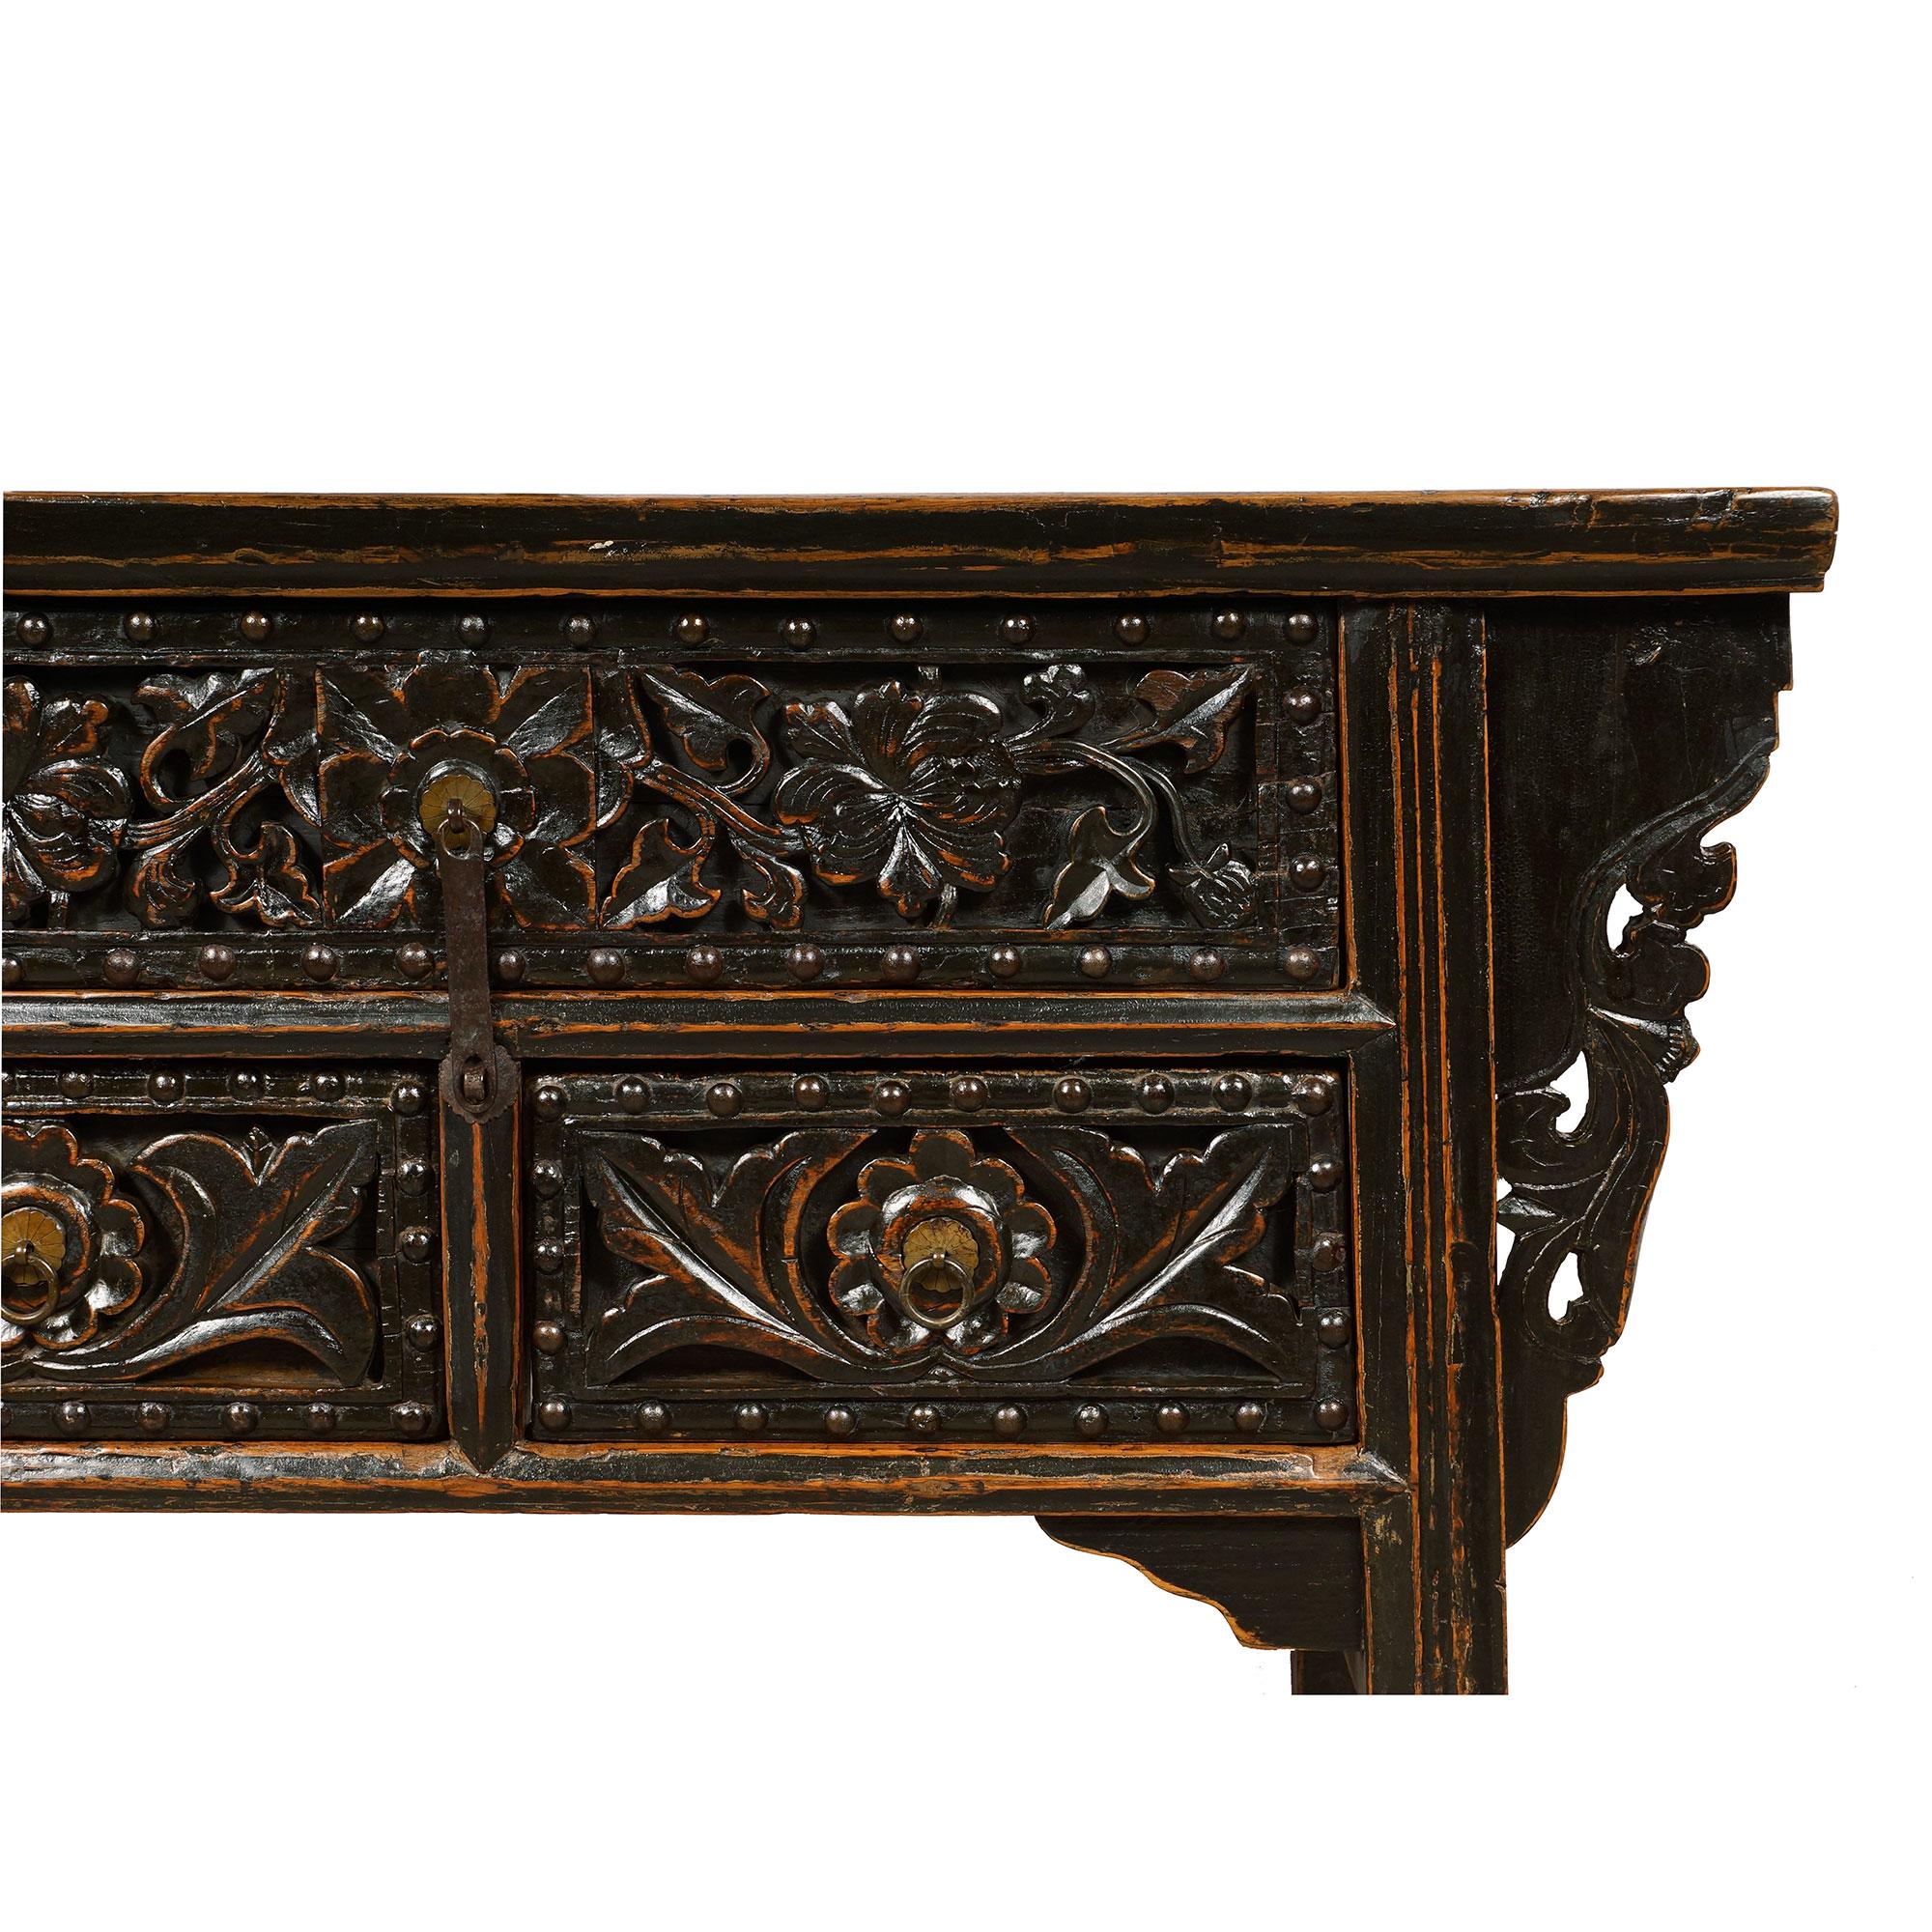 19th Century Antique Chinese Carved Shan xi Console Table/Sideboard In Good Condition For Sale In Pomona, CA